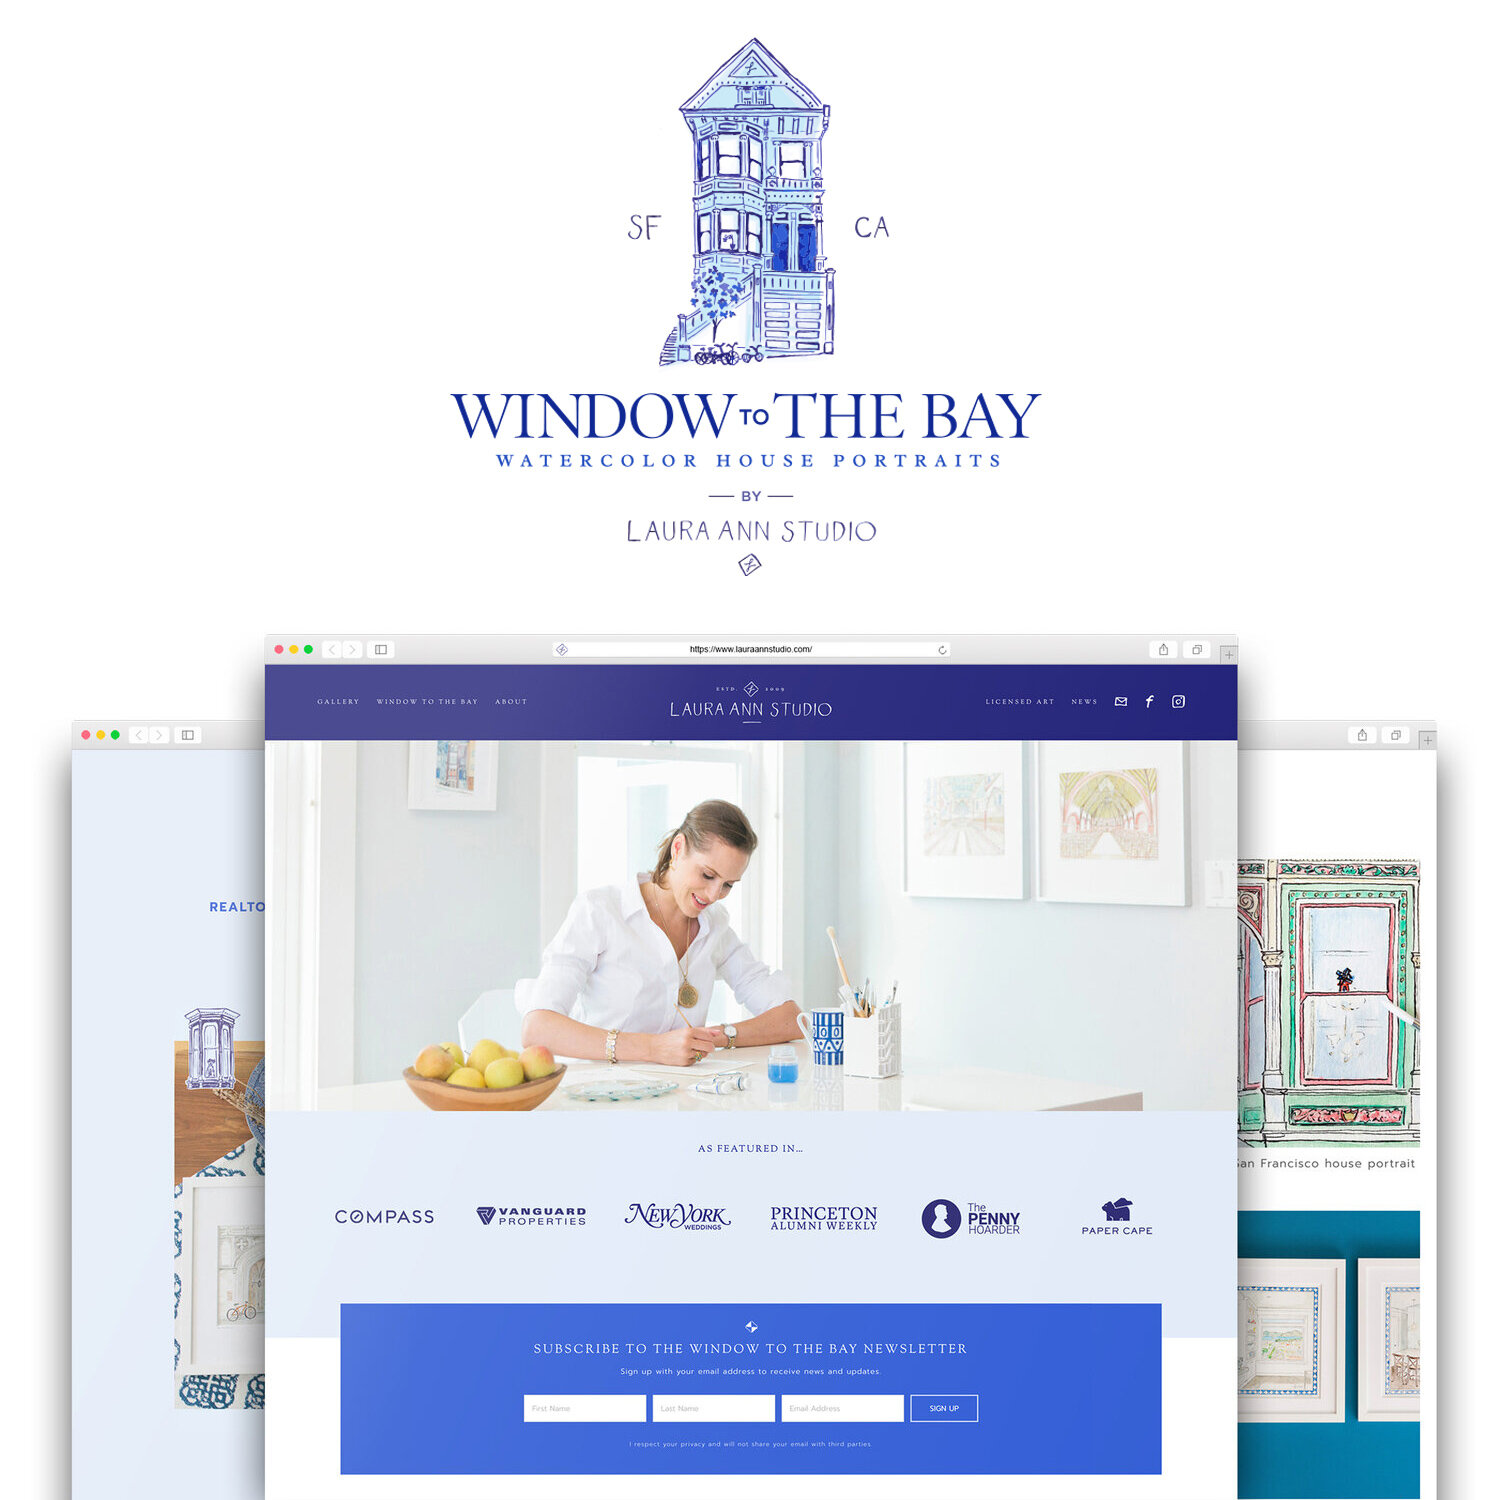 Laura-Ann-Studio-Window-to-The-Bay-WEBSITE-Mockup-by-Spade-and-Anchor-Creative.jpg